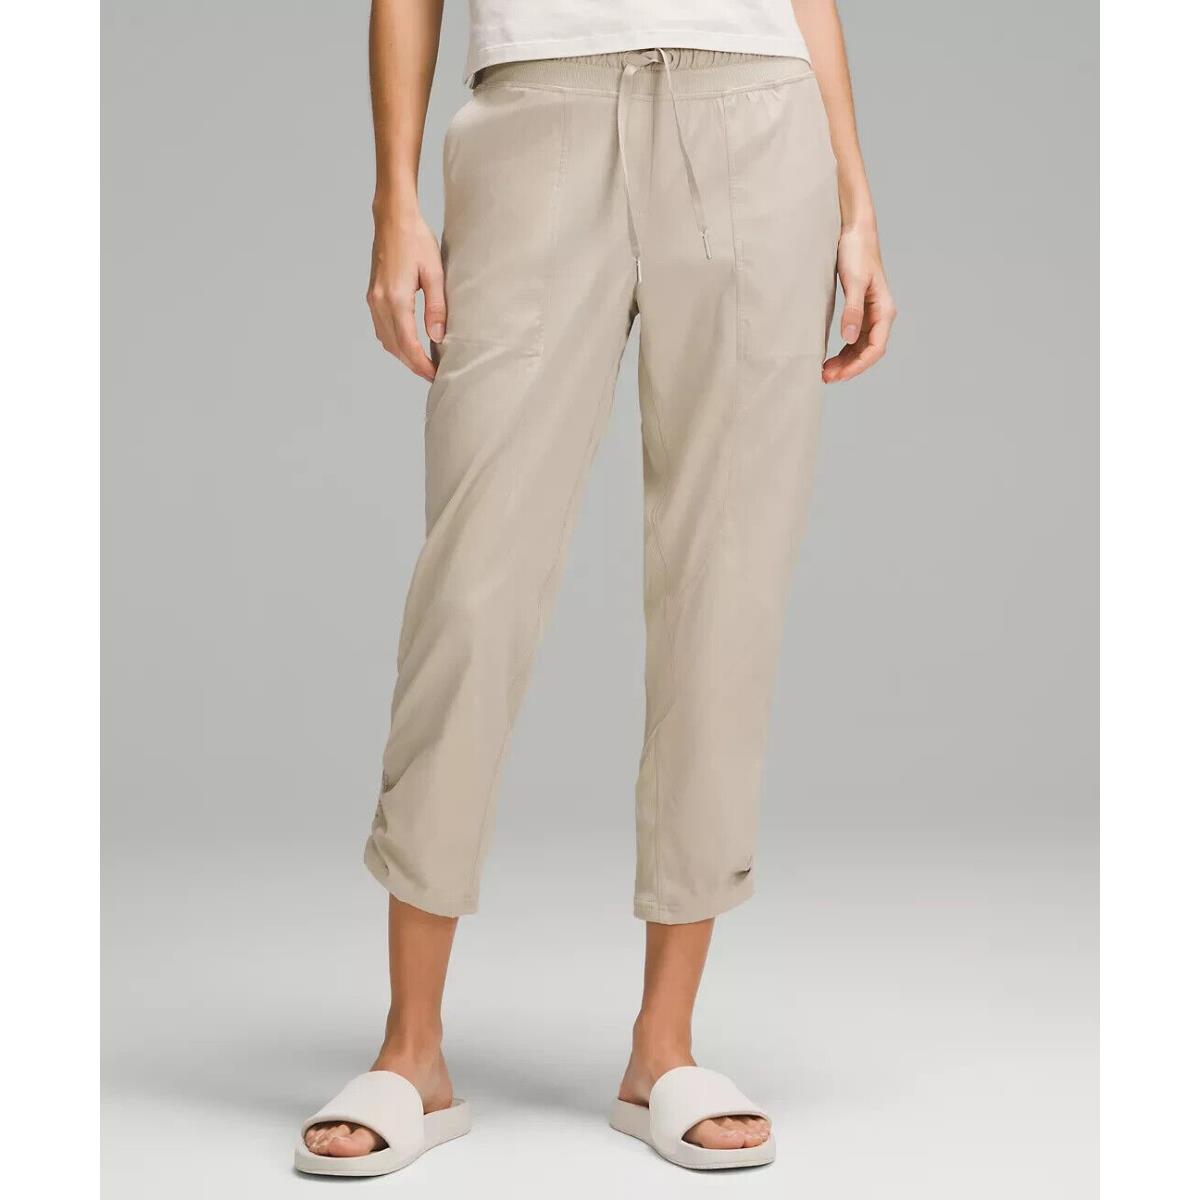 Lululemon Dance Studio Mid-rise Cropped Lined Pant Mojave Tan Size 2. LW6CLWS